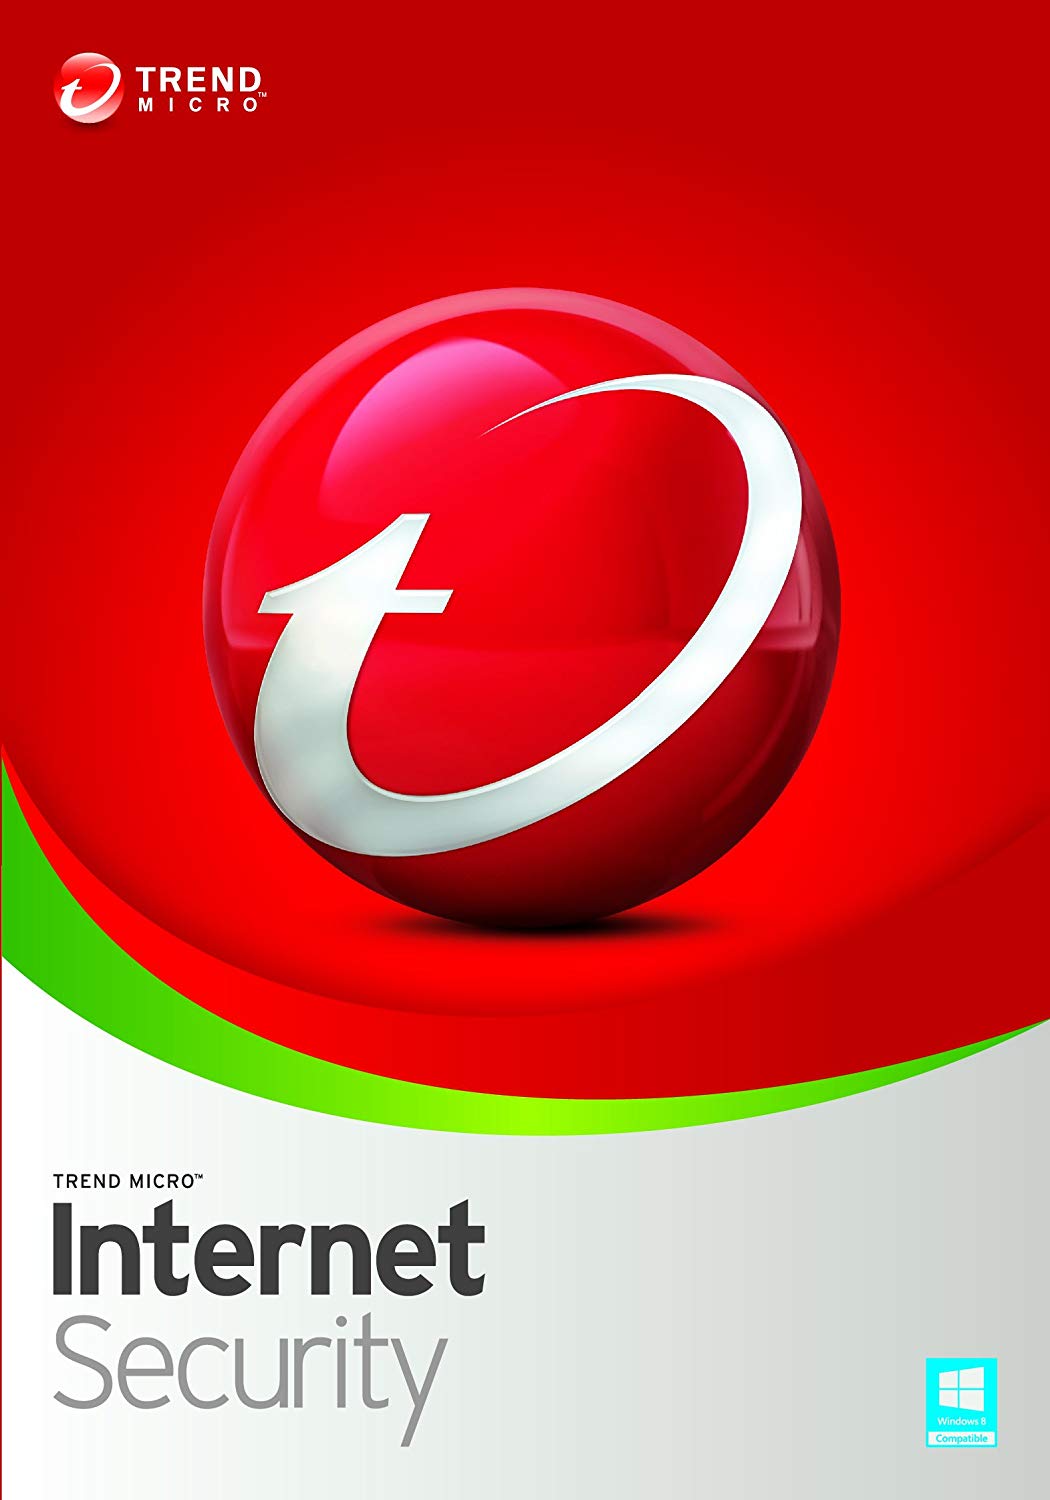 Trend Micro Internet Security CD Key (Digital Download): 5 Devices